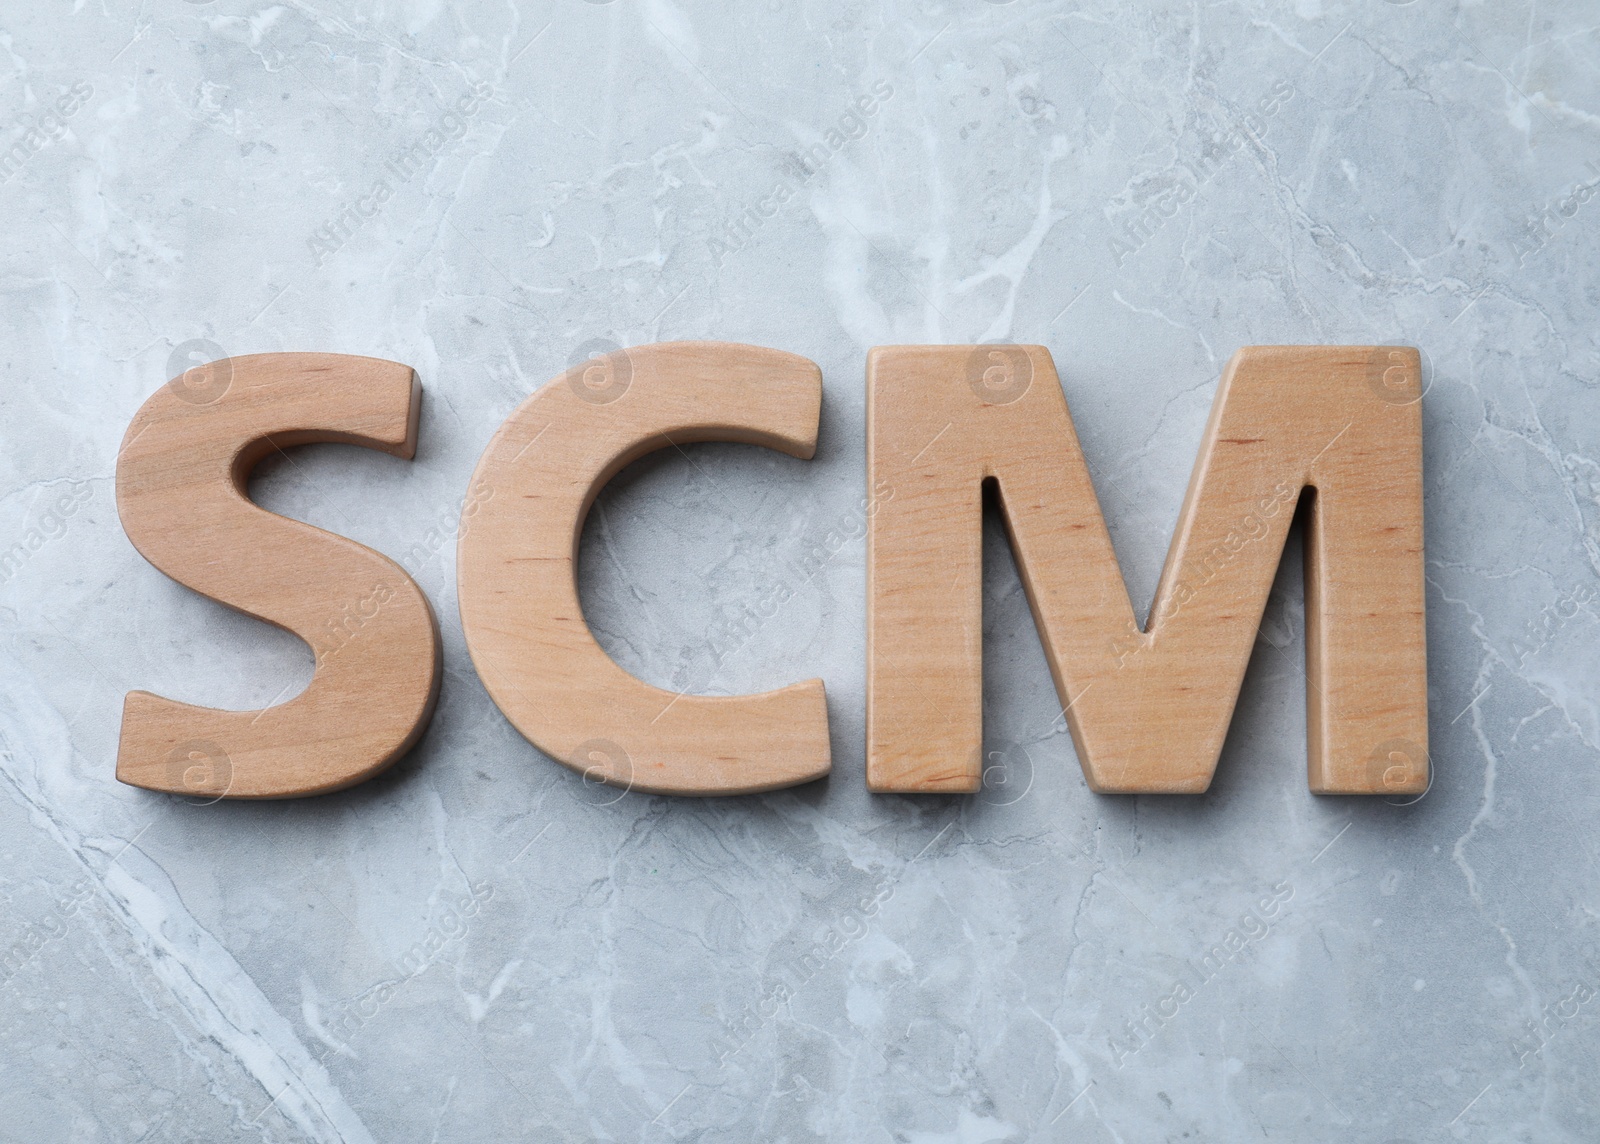 Photo of Abbreviation SCM (Supply Chain Management) made of wooden letters on light grey marble background, flat lay